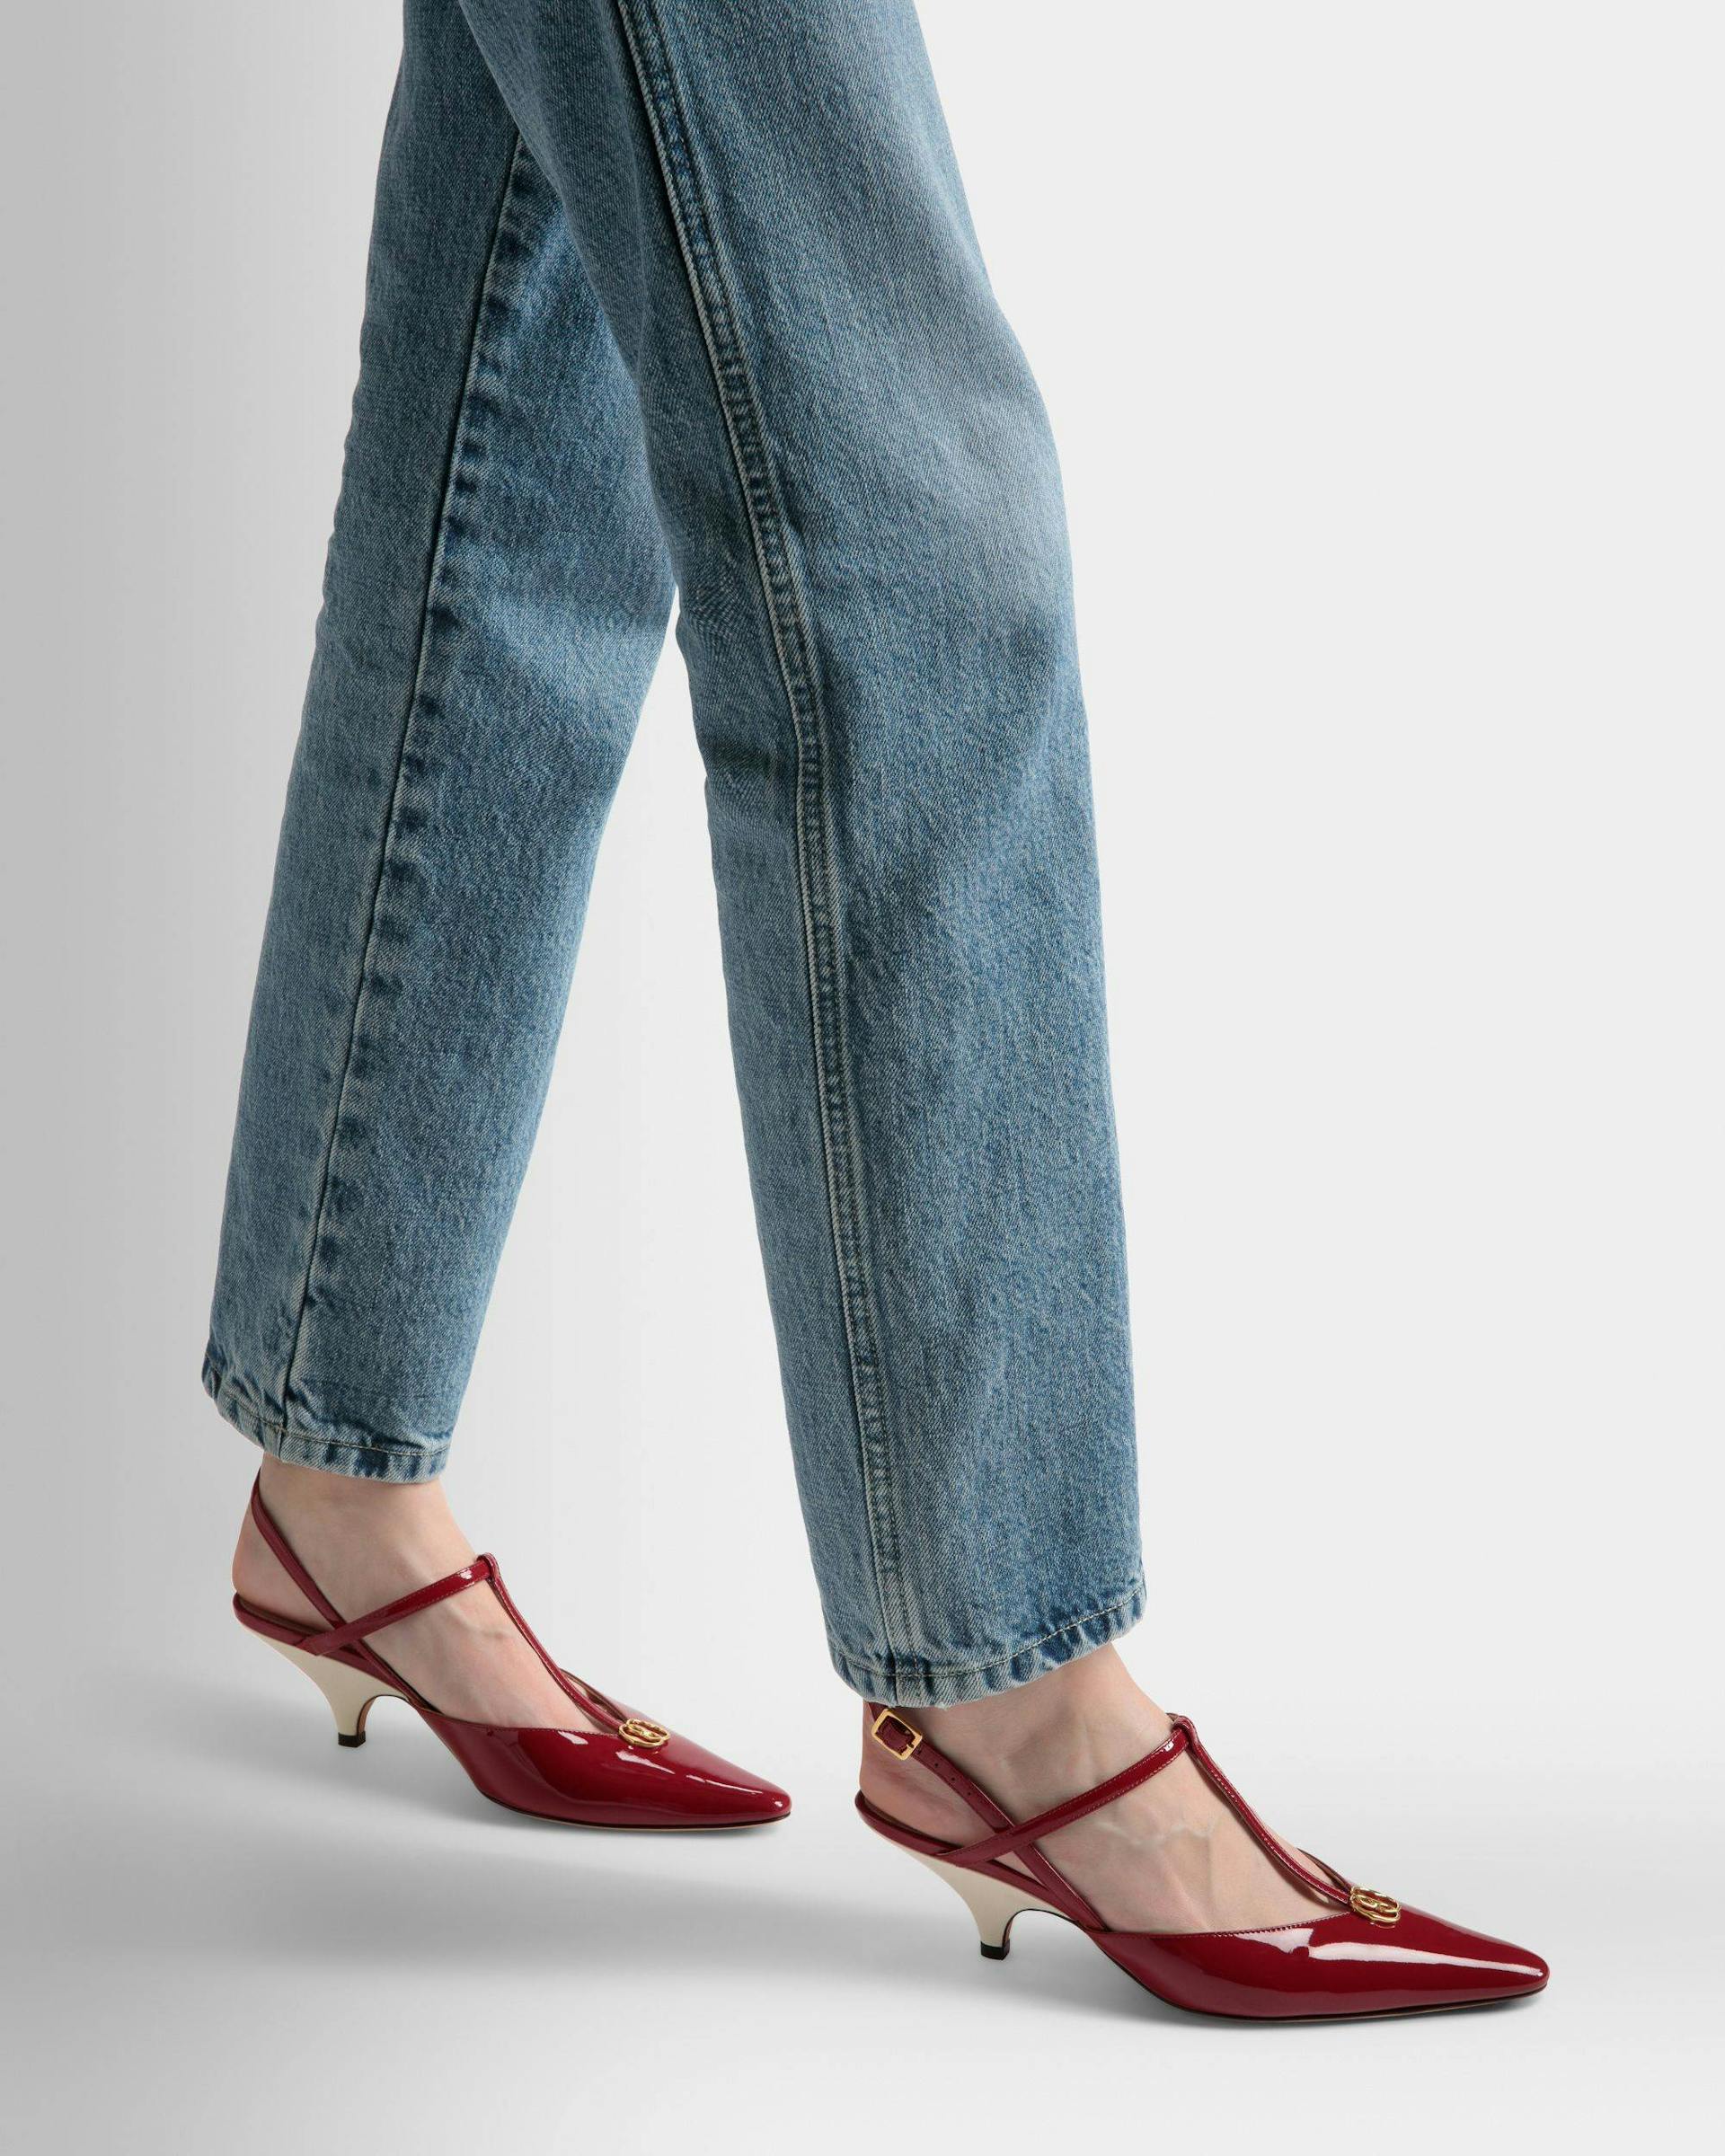 Women's Katy Sling Pump In Ruby Red And Bone Leather | Bally | On Model Close Up